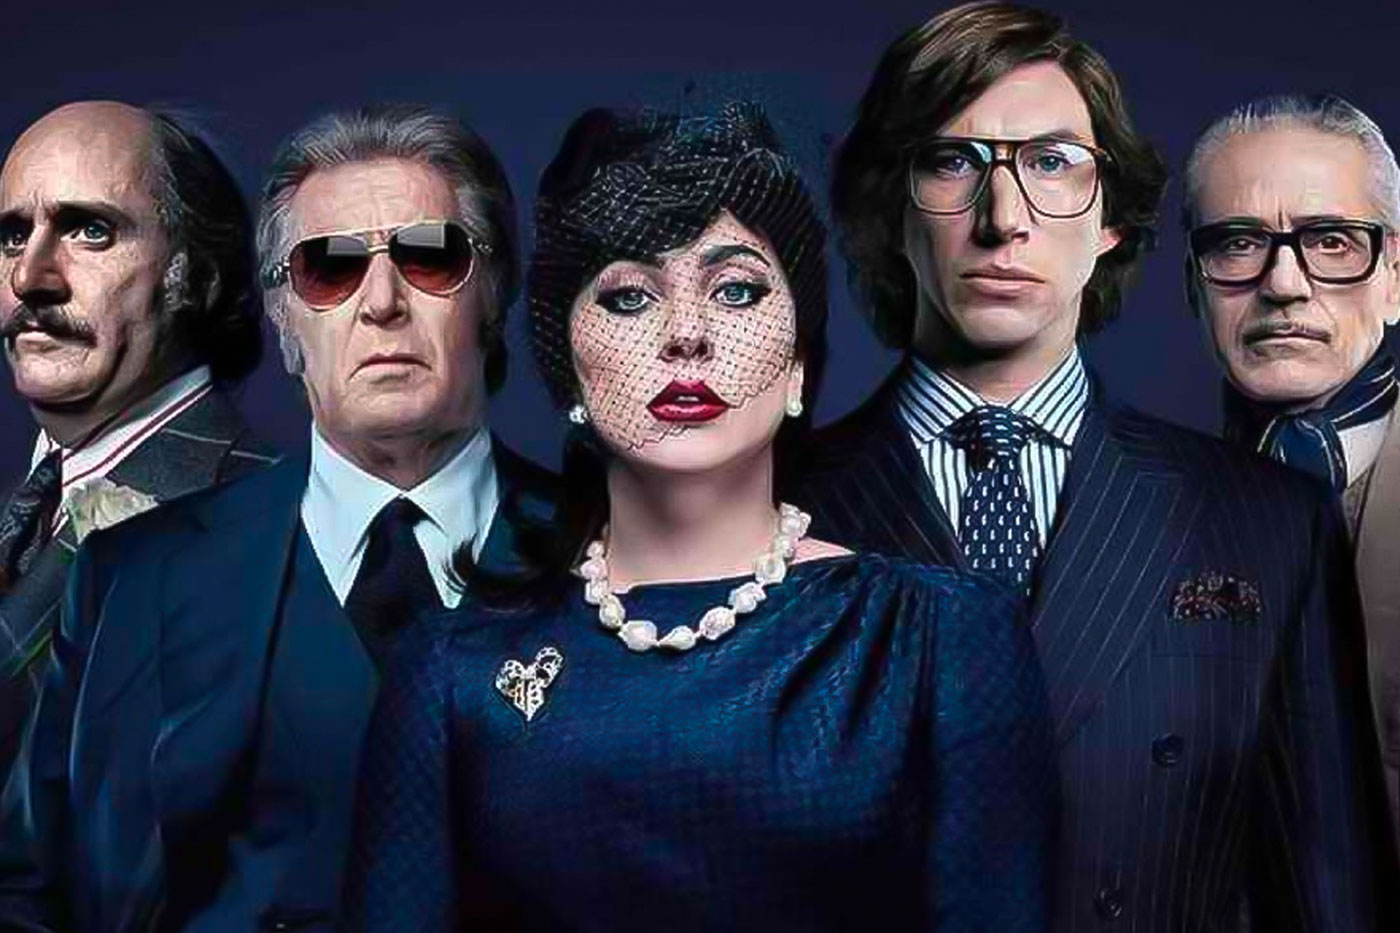 Gucci Family Releases Official Statement Condemning Their Portrayal in Ridley Scott's 'House of Gucci' lady gaga jared leto al pacino adam driver